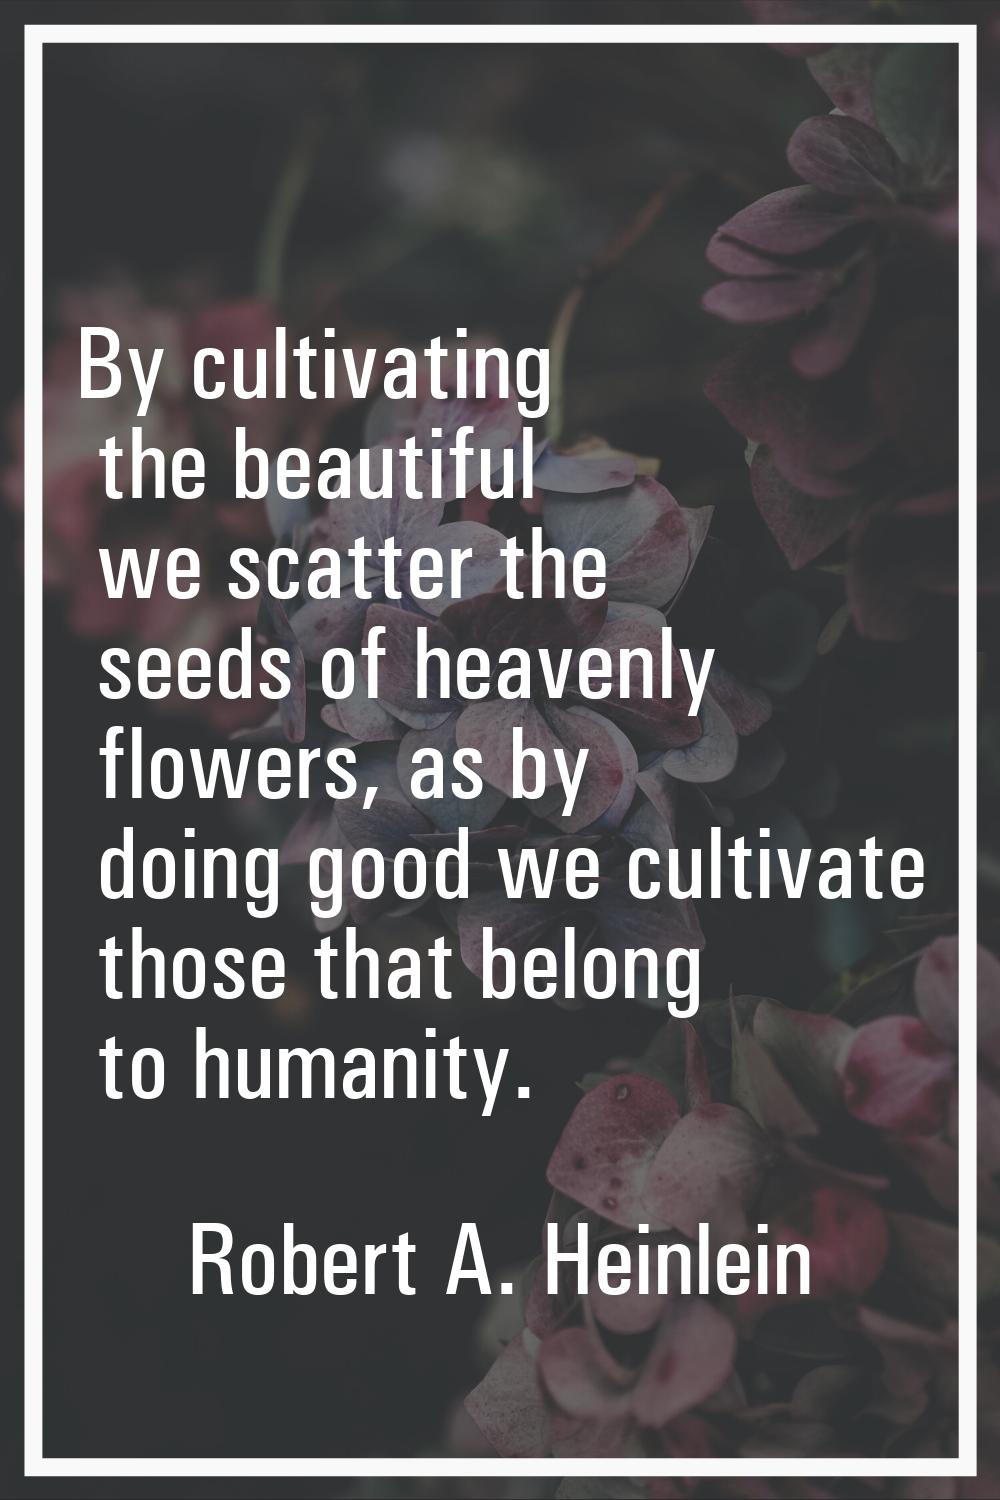 By cultivating the beautiful we scatter the seeds of heavenly flowers, as by doing good we cultivat